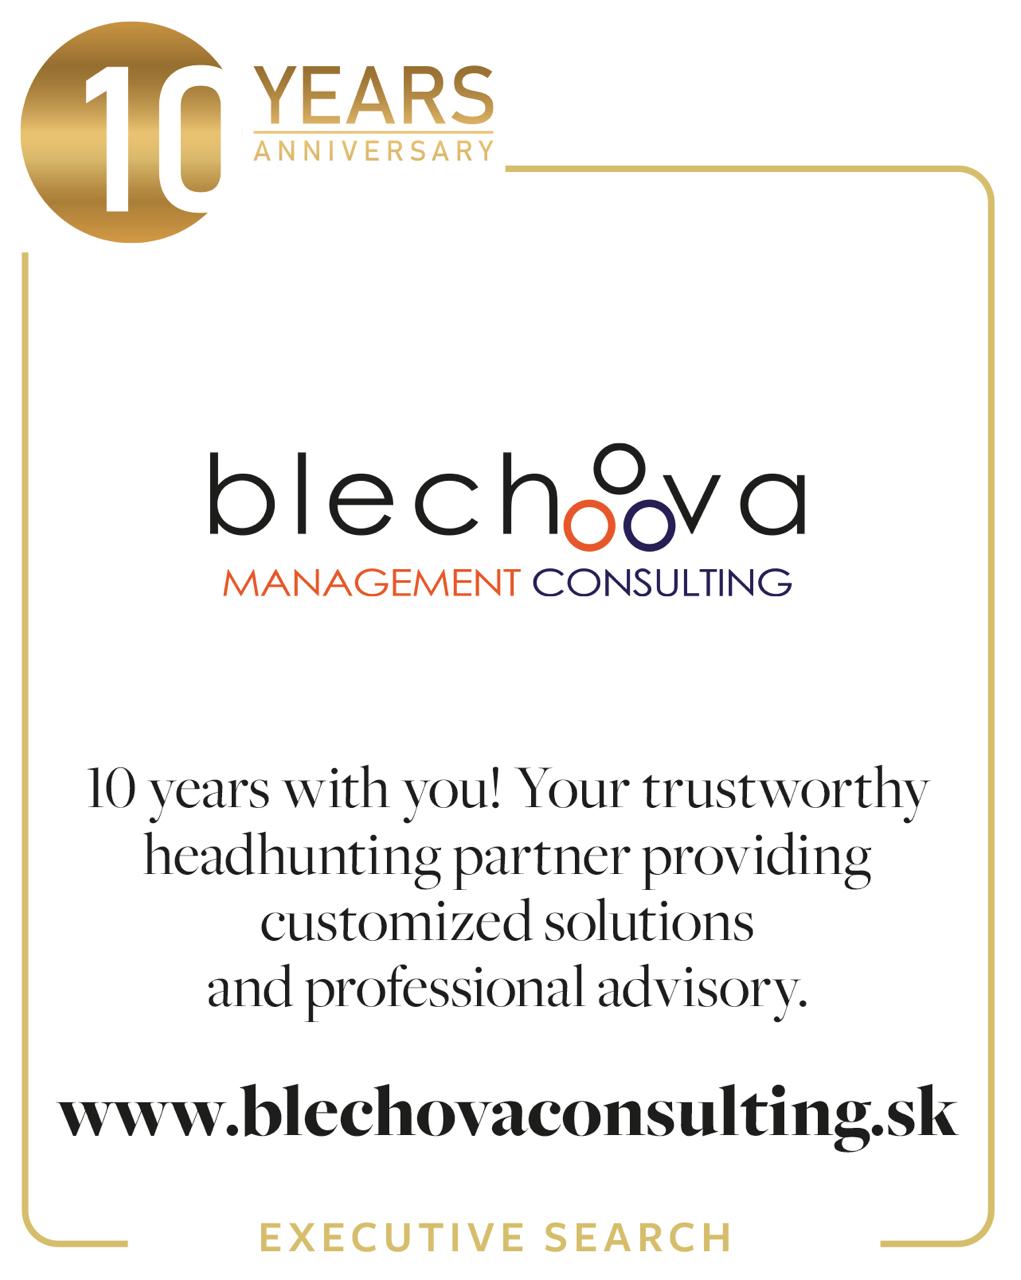 10 years with you! Your trustworthy headhunting partner providing customized solutions and professional advisory.